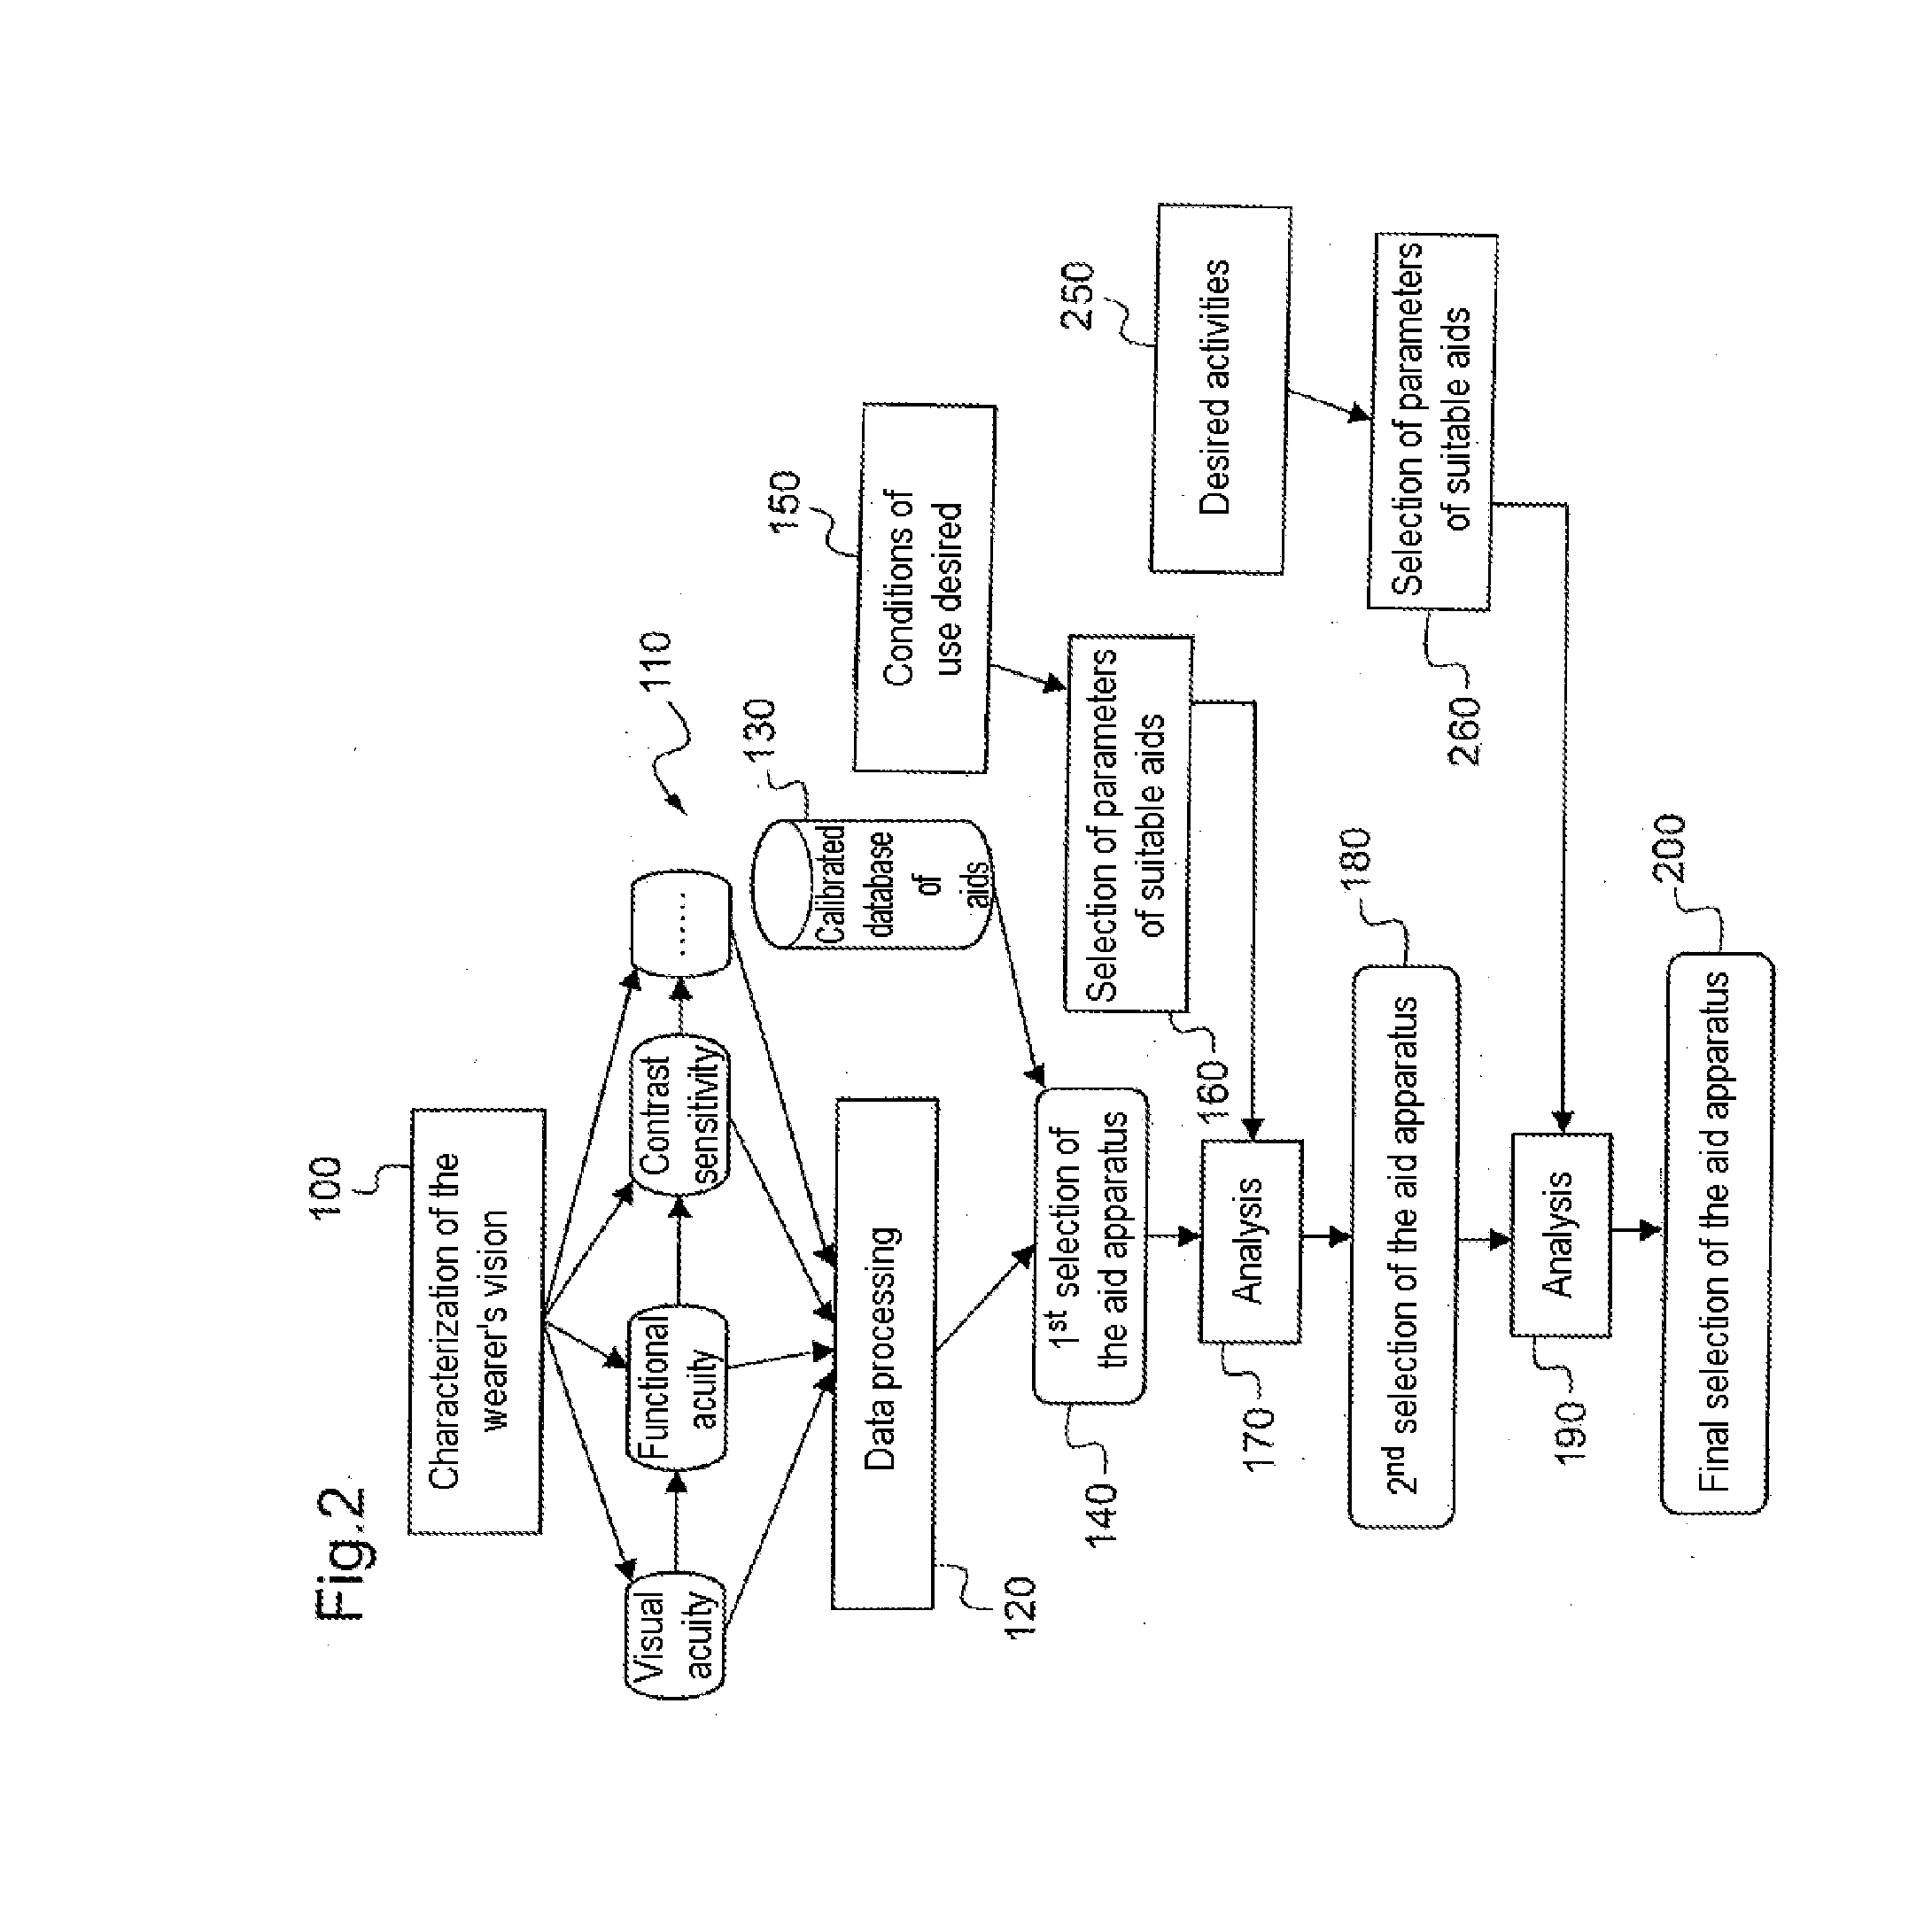 Device for determining a group of vision aids suitable for a person